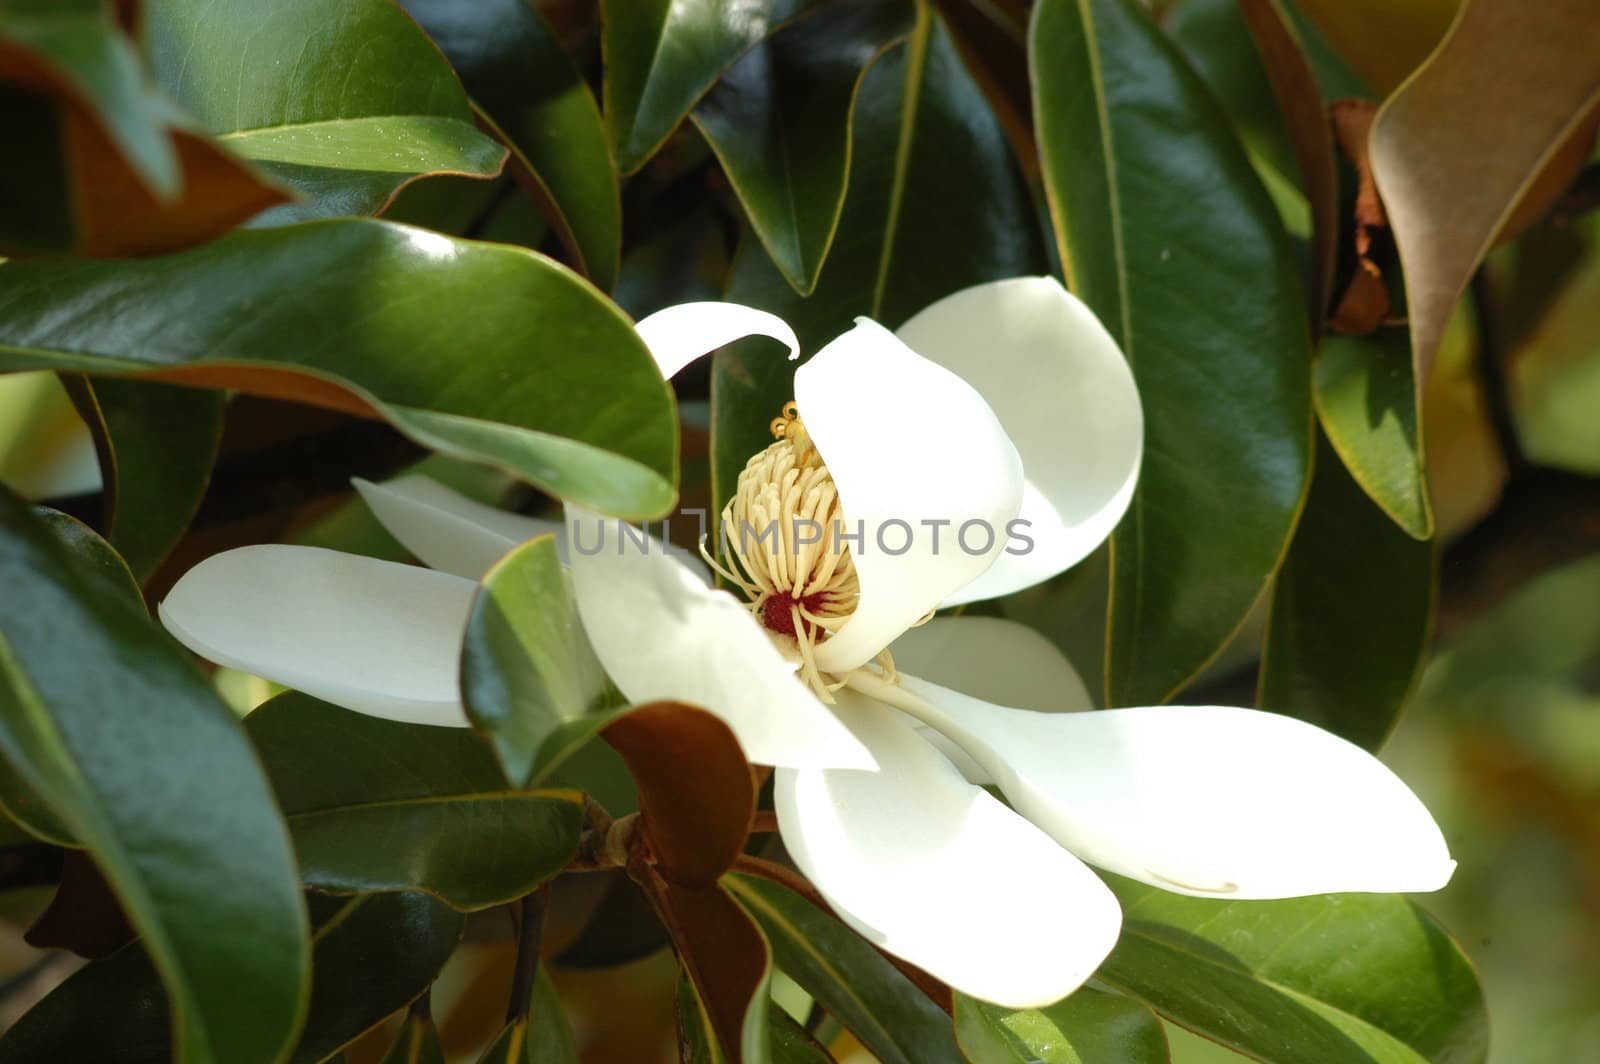 A large white magnolia bloom seen up close